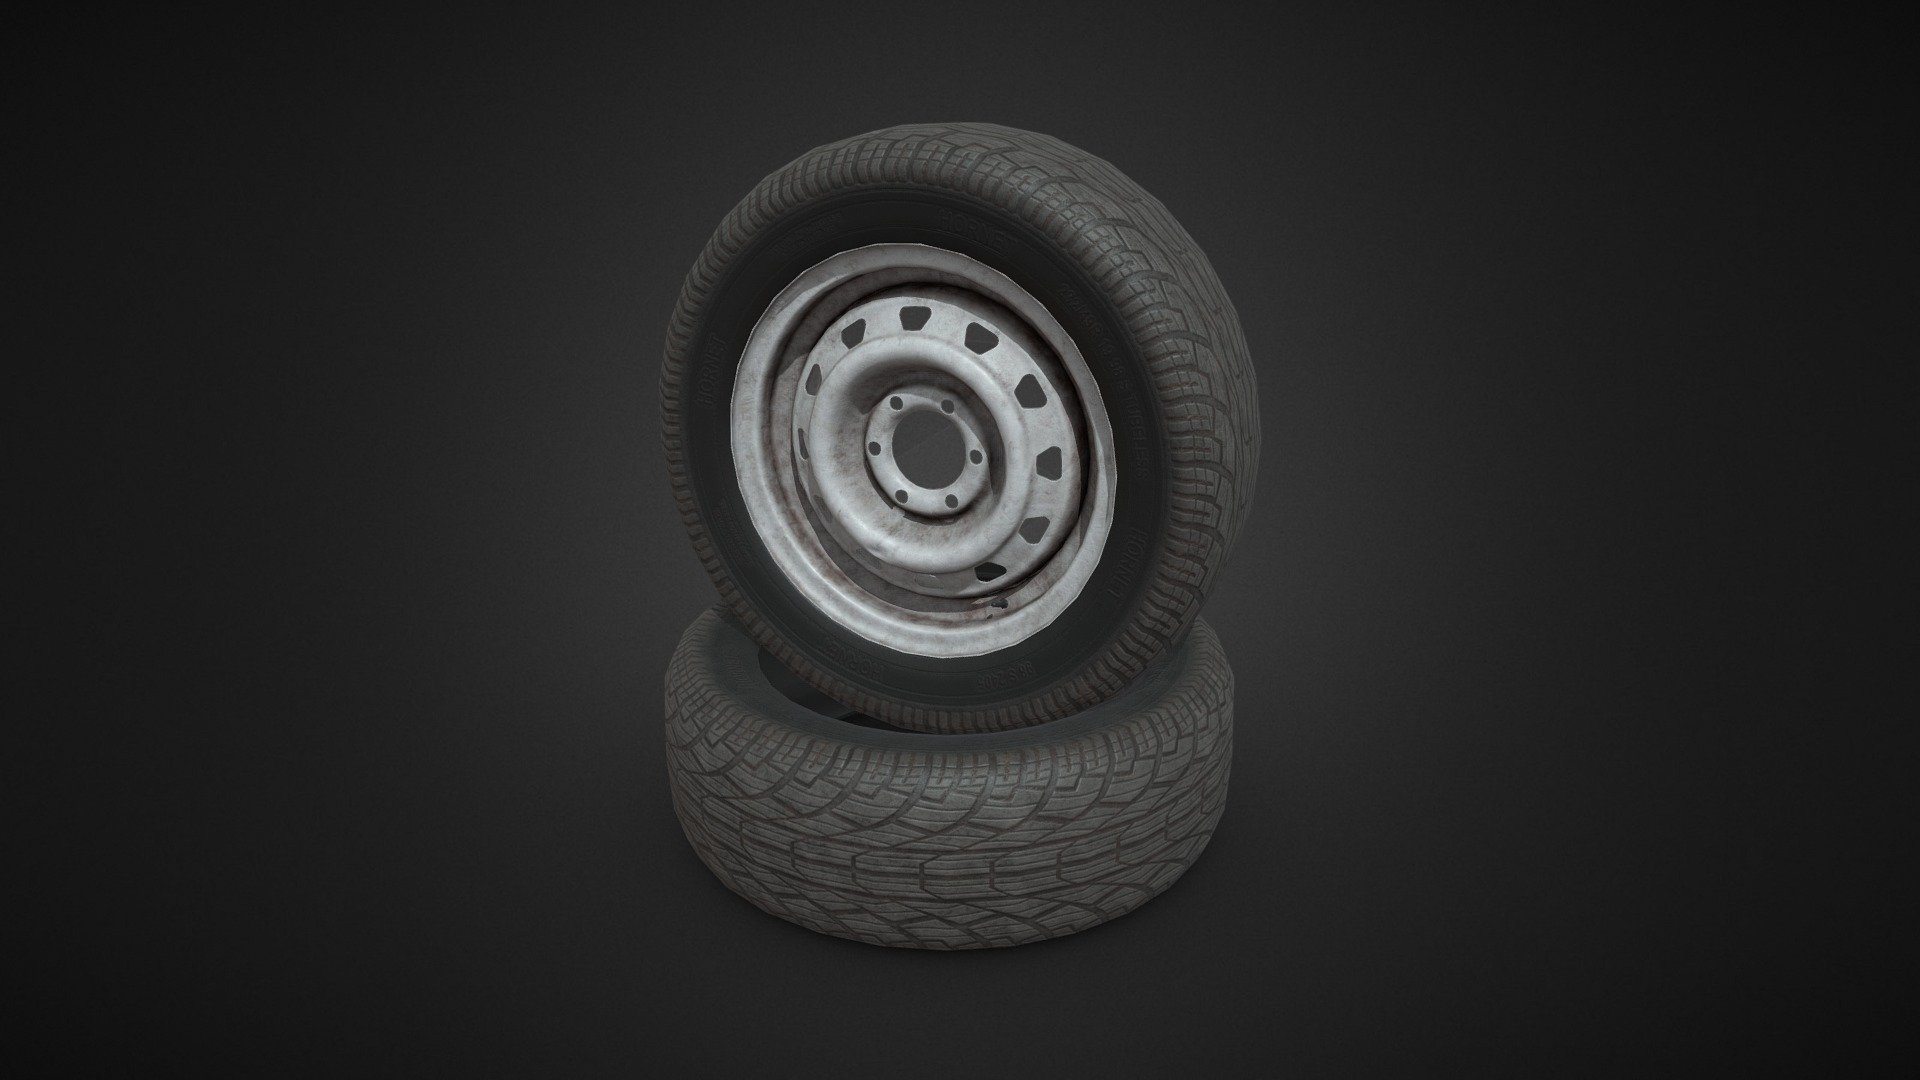 The wheel is made in blender. It was painted in Substance Painter. 
disk: 7994 tris; Tire: 1260 tris; Pump: 138; total: 9392 tris.
Textures: 2048x2048 for disk and tire, 1024x1024 for pump 3d model